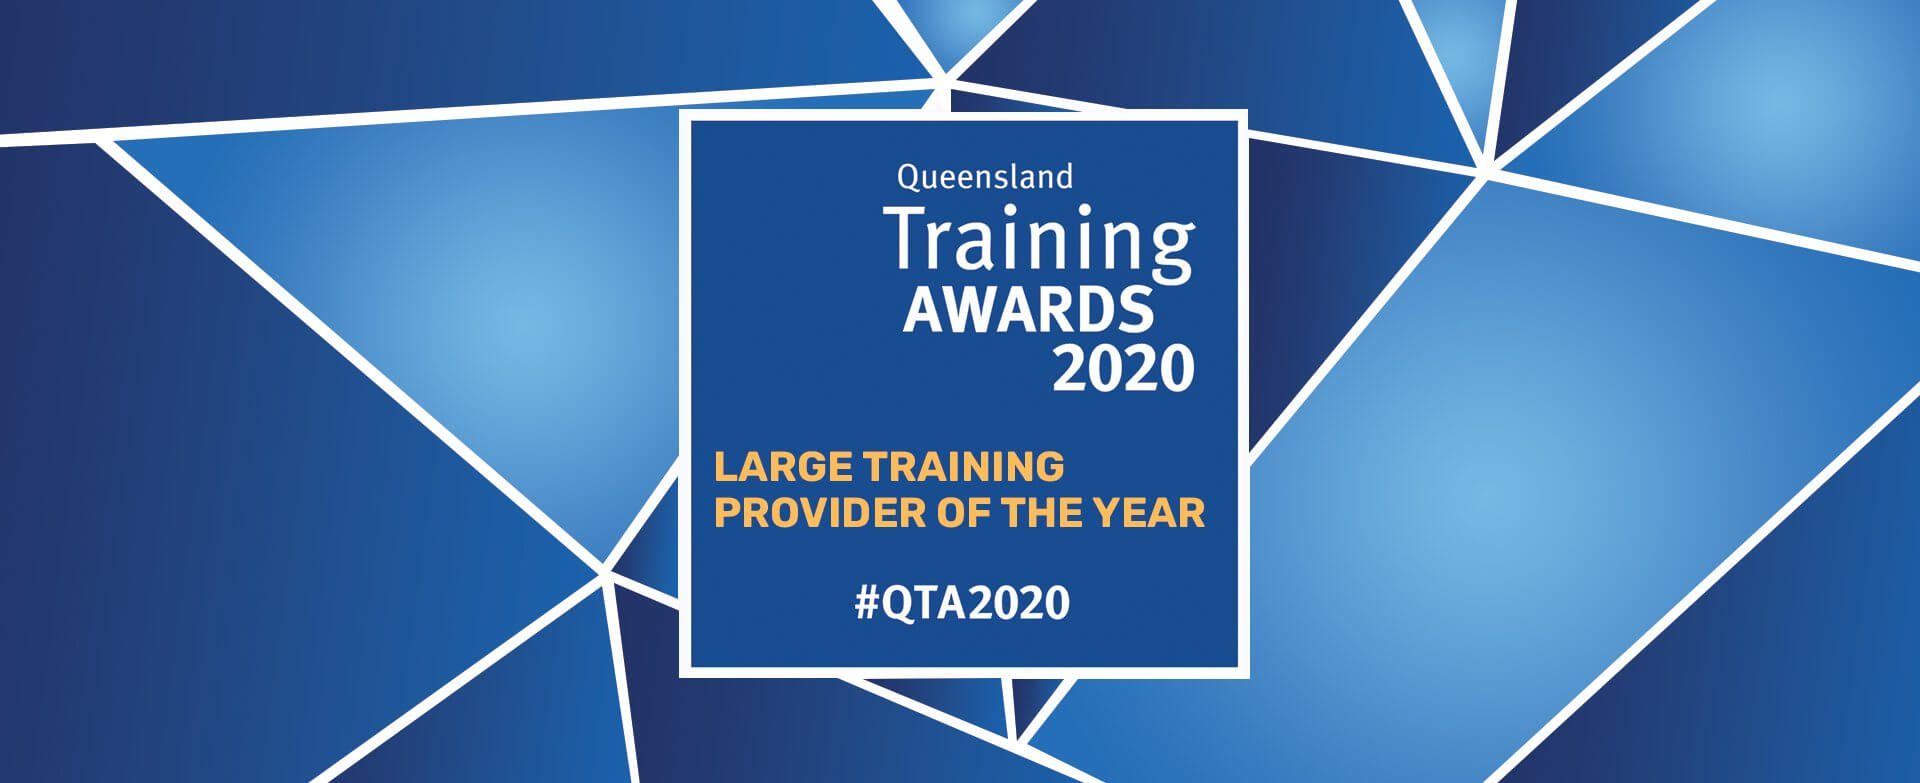 Strong Partnerships and Links Contribute to Asset College QTA2020 Win